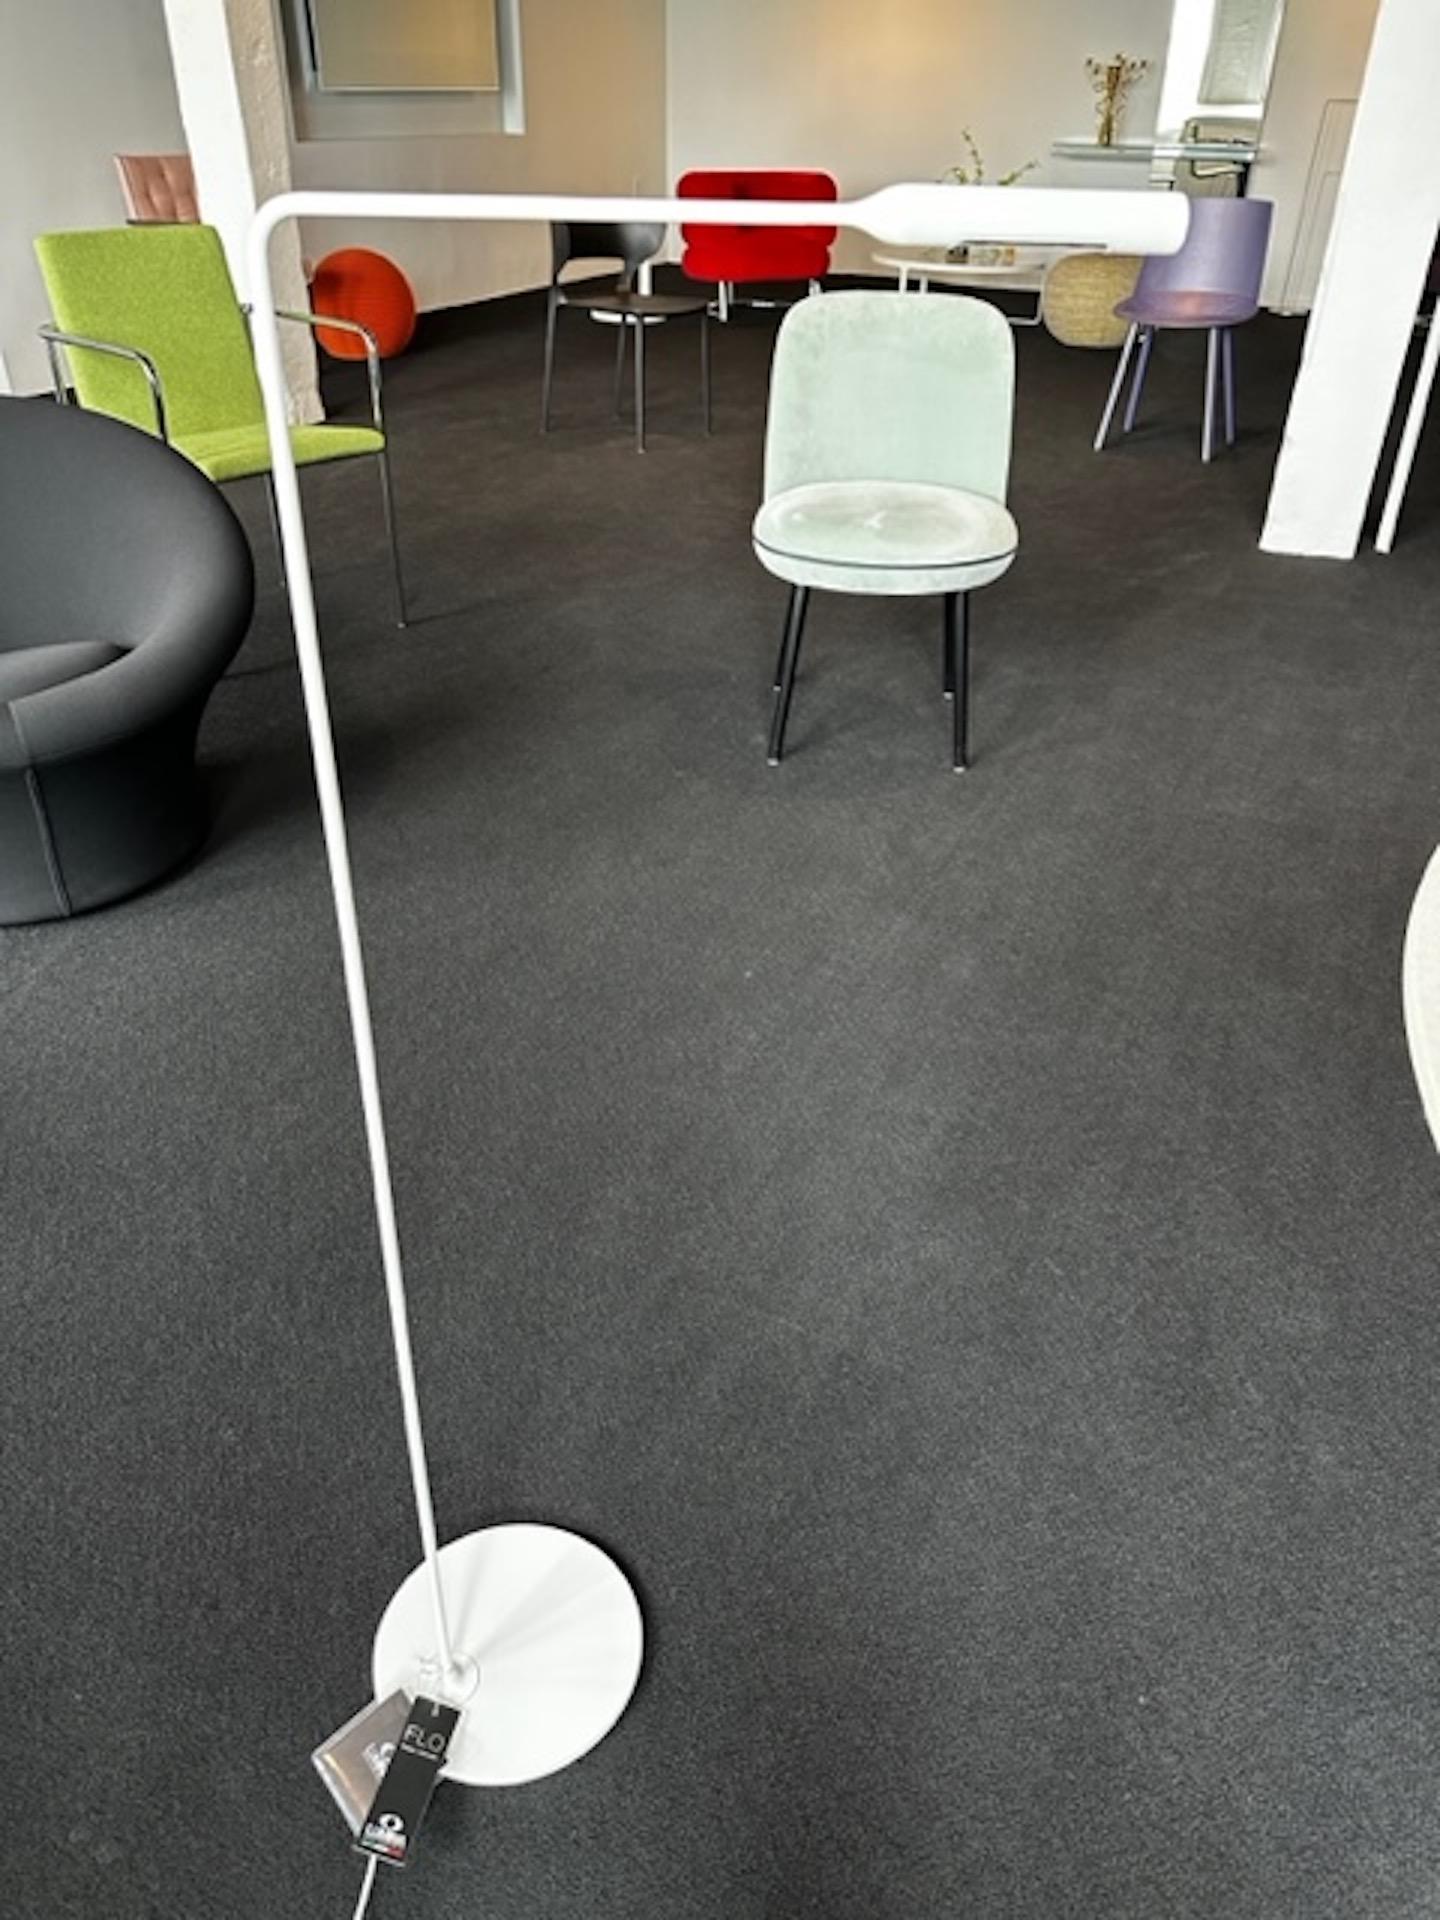 6W LED
2-step push button dimming
on the head
In parallel with the table versions, Lumina and Foster + Partners developed two floor-standing lamps that reprise their defining characteristics.
The Flo Floor has a 6W LED (dual luminous power) and an